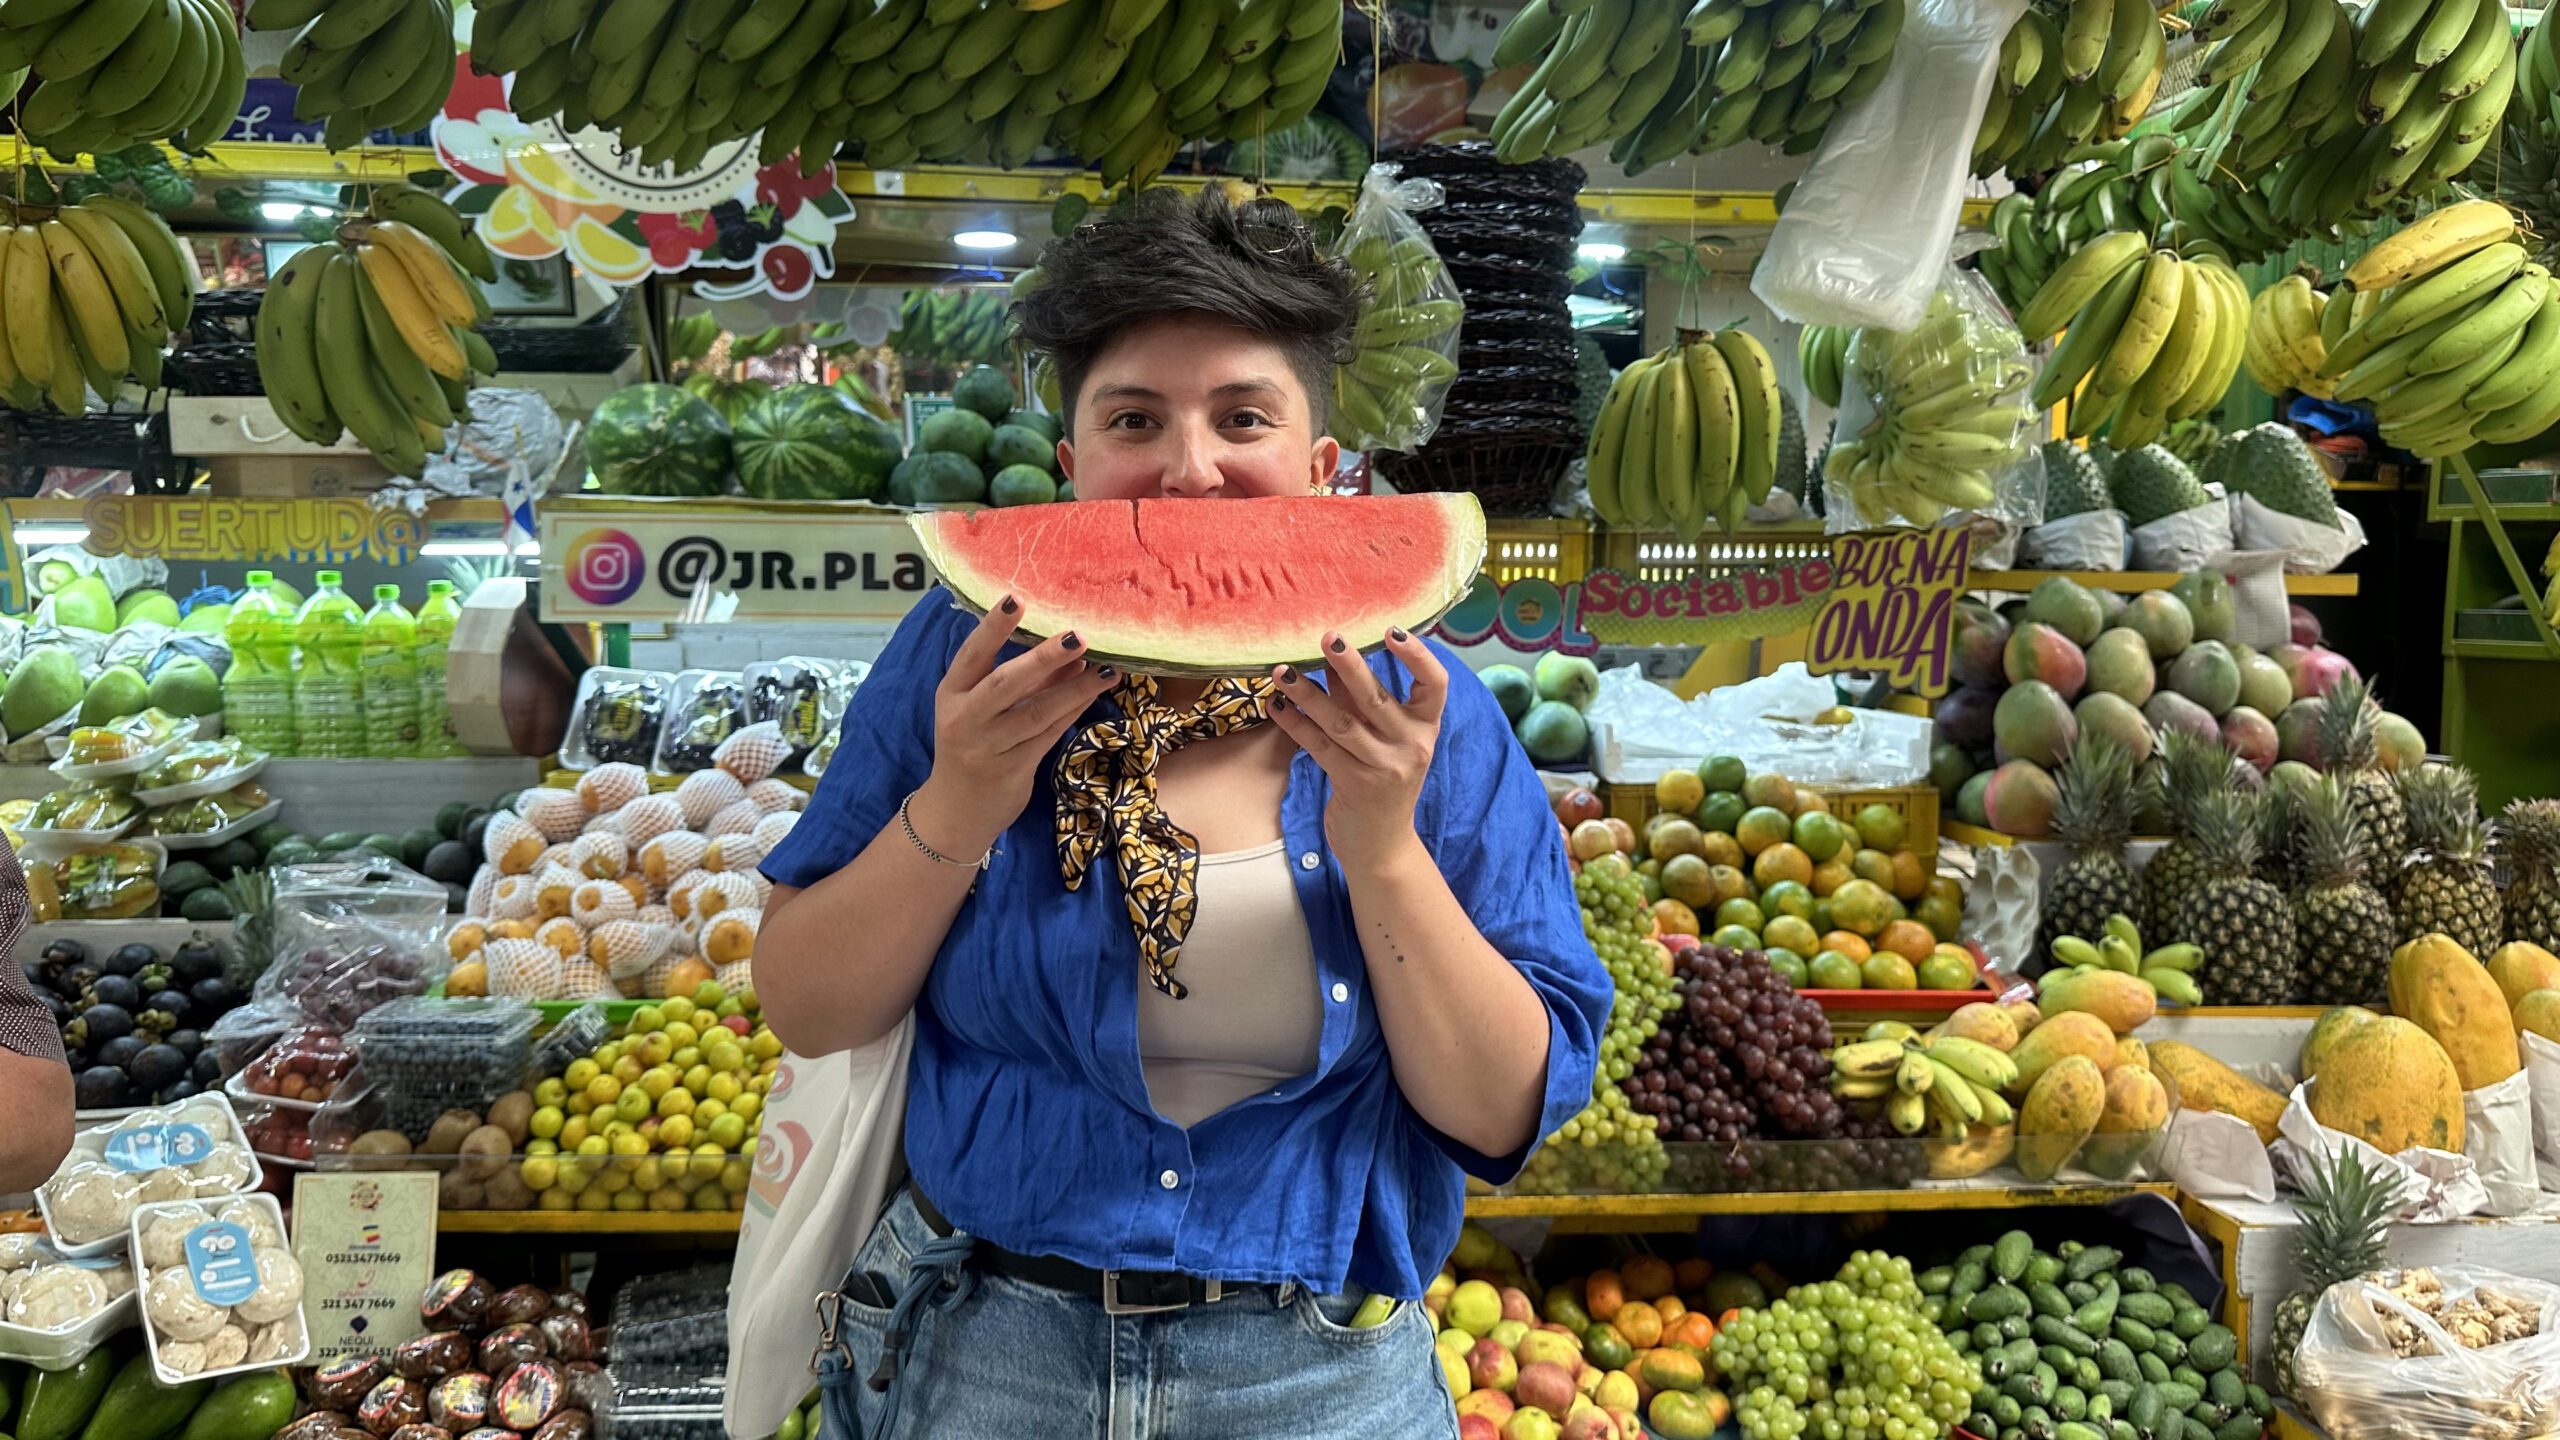 A person stands in front of a colorful fruit market display in Bogotá, holding and taking a bite of a large slice of watermelon, while wearing a blue shirt and jeans—a perfect snapshot from one of the vibrant tours in Bogotá.